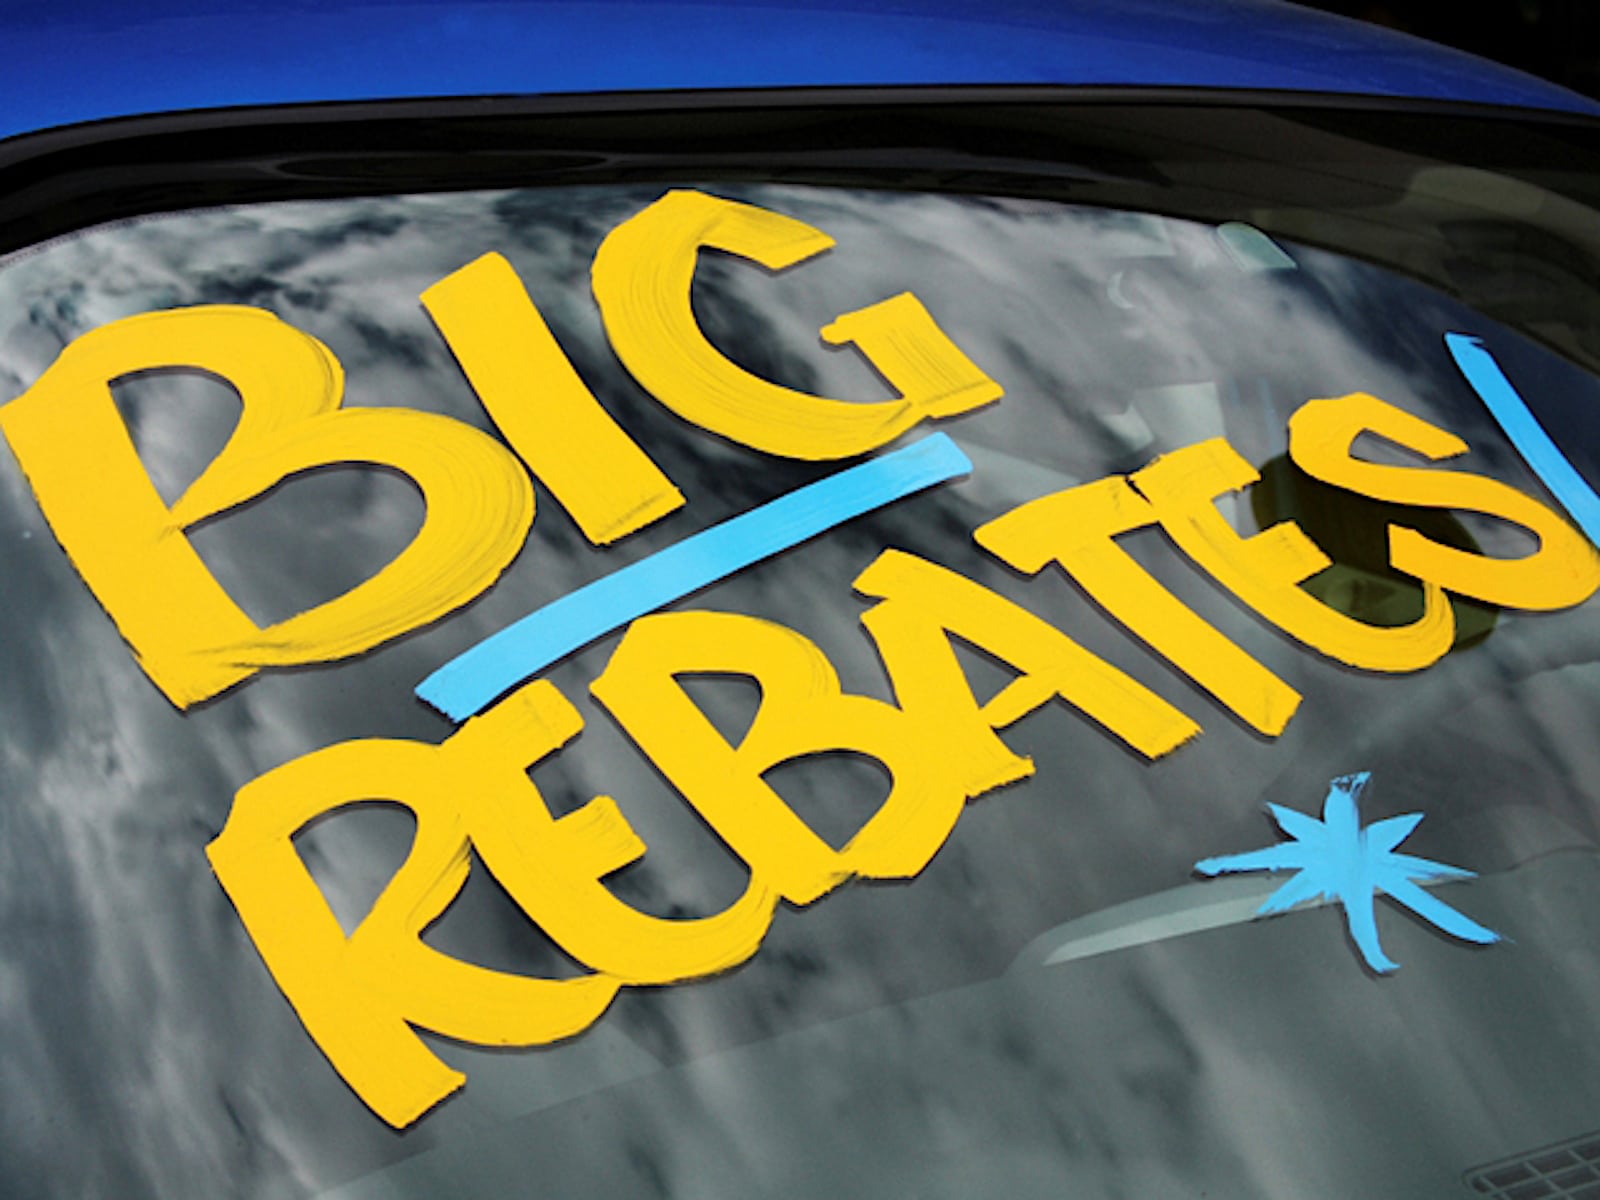 rebates-incentives-may-be-gone-forever-says-autonation-ceo-the